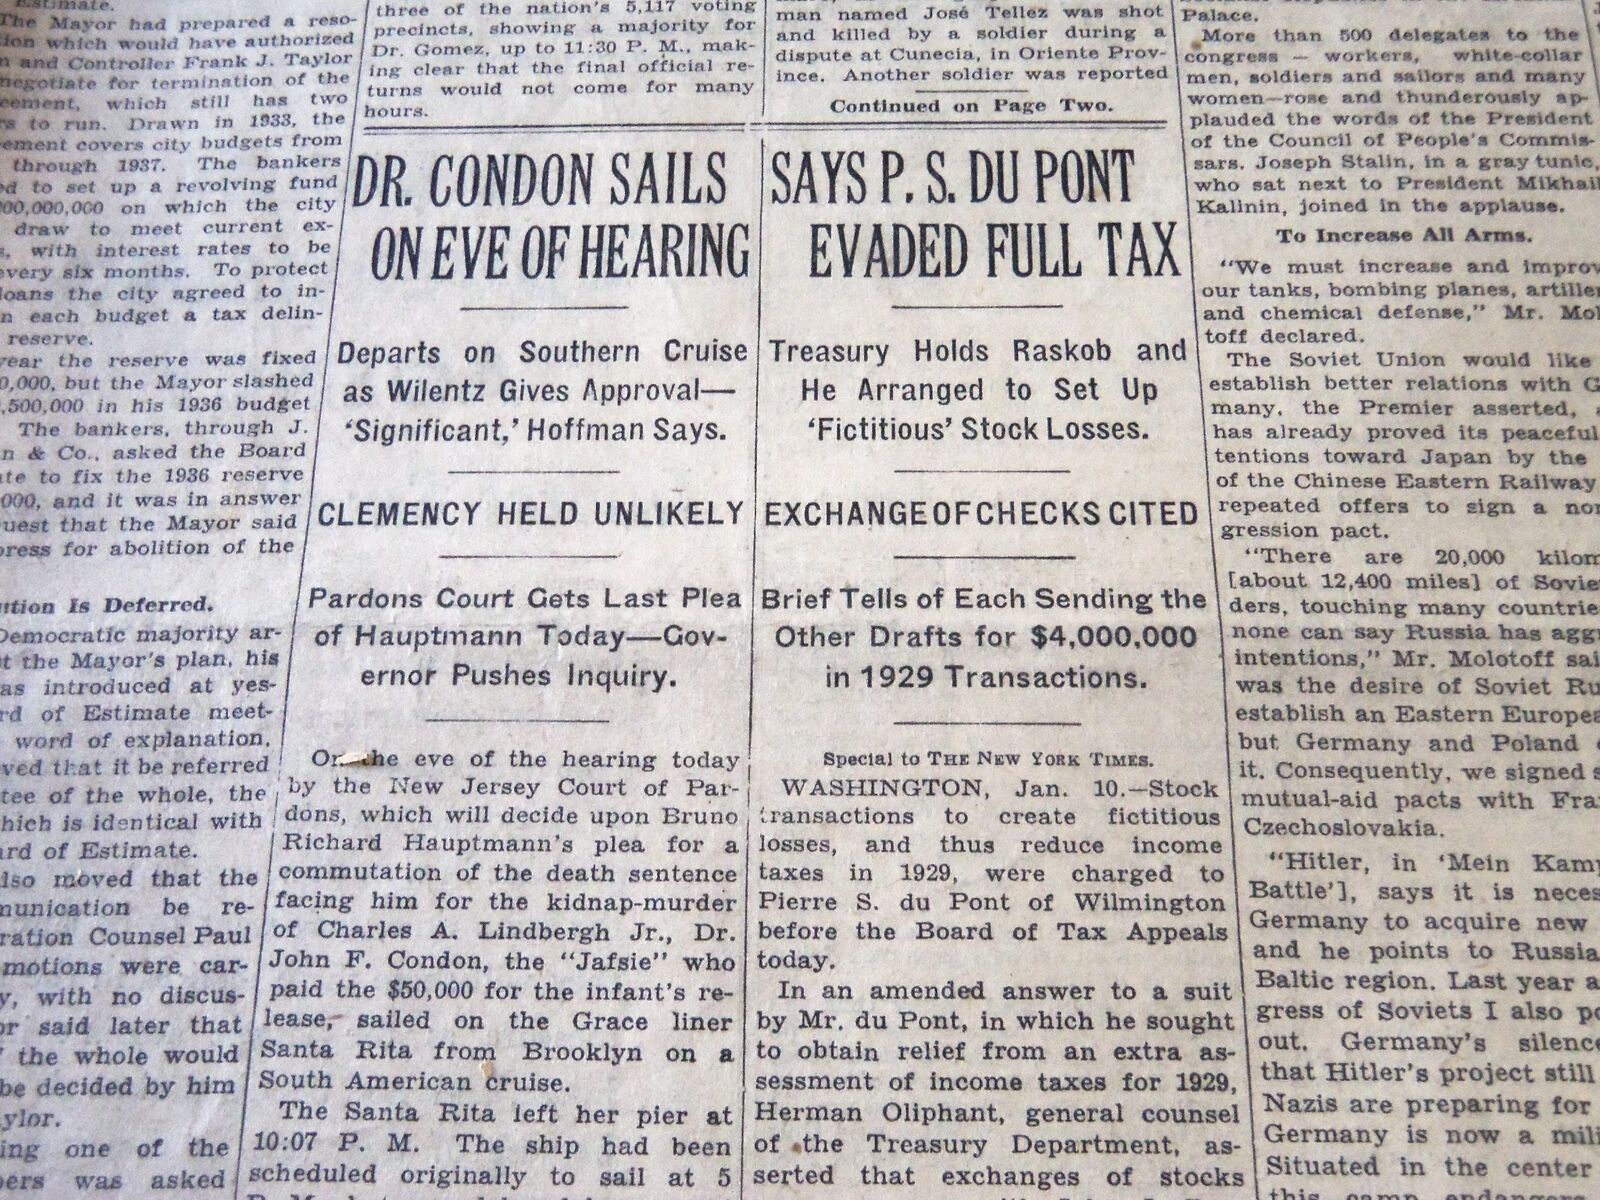 1936 JANUARY 11 NEW YORK TIMES - DR. CONDON SAILS ON EVE OF HEARING - NT 6348